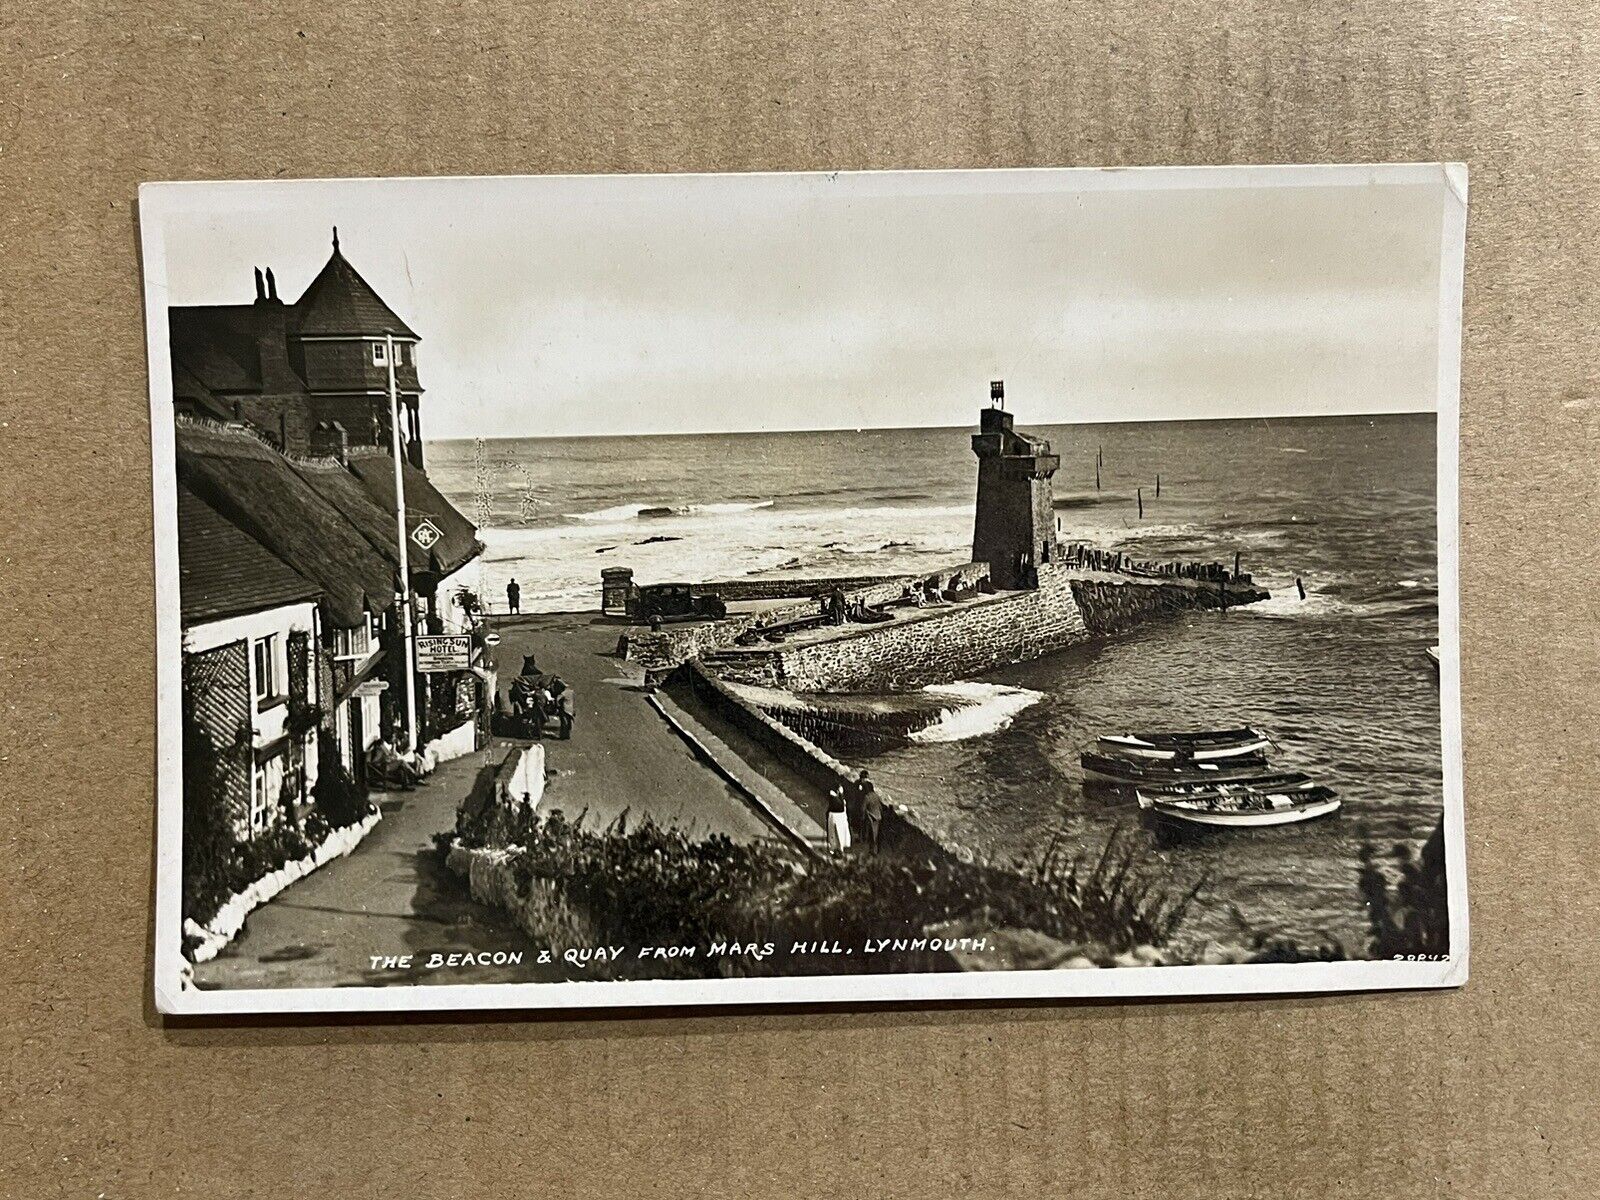 Postcard RPPC Lynmouth England UK Beacon & Quay from Mars Hill Hotel Vintage PC